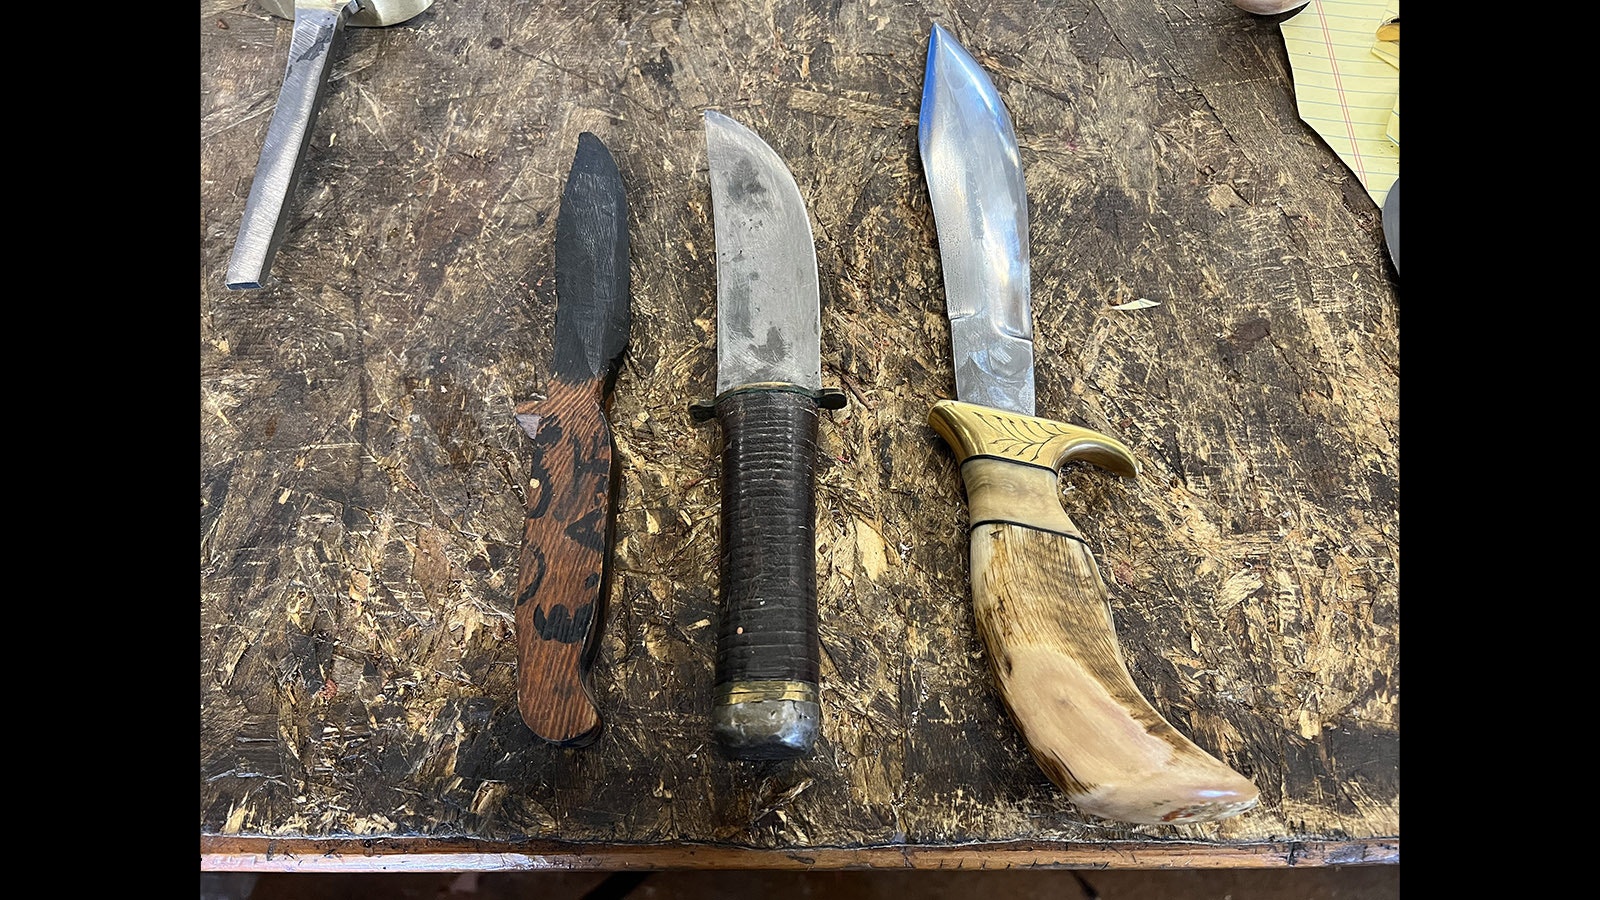 The wooden knife on the left was Ed Fowler’s first creation when he was a young boy. The middle blade represents one of his first works crafted from steel. The knife on the right is representative of his work after decades of experience.